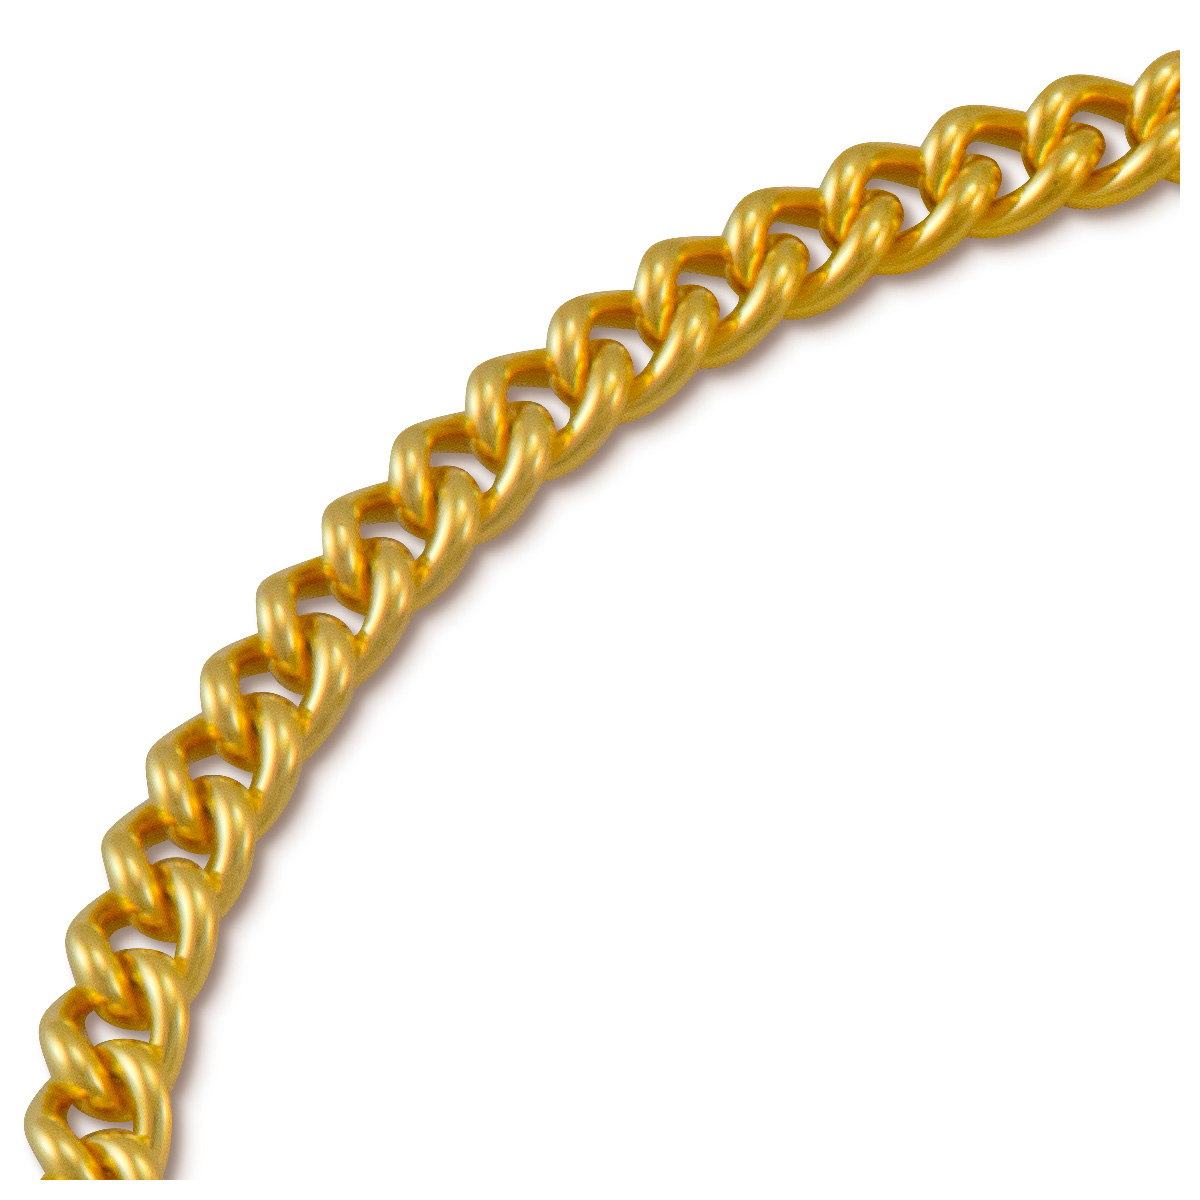 Pocket watch chain, gold plated brass, length 30 cm